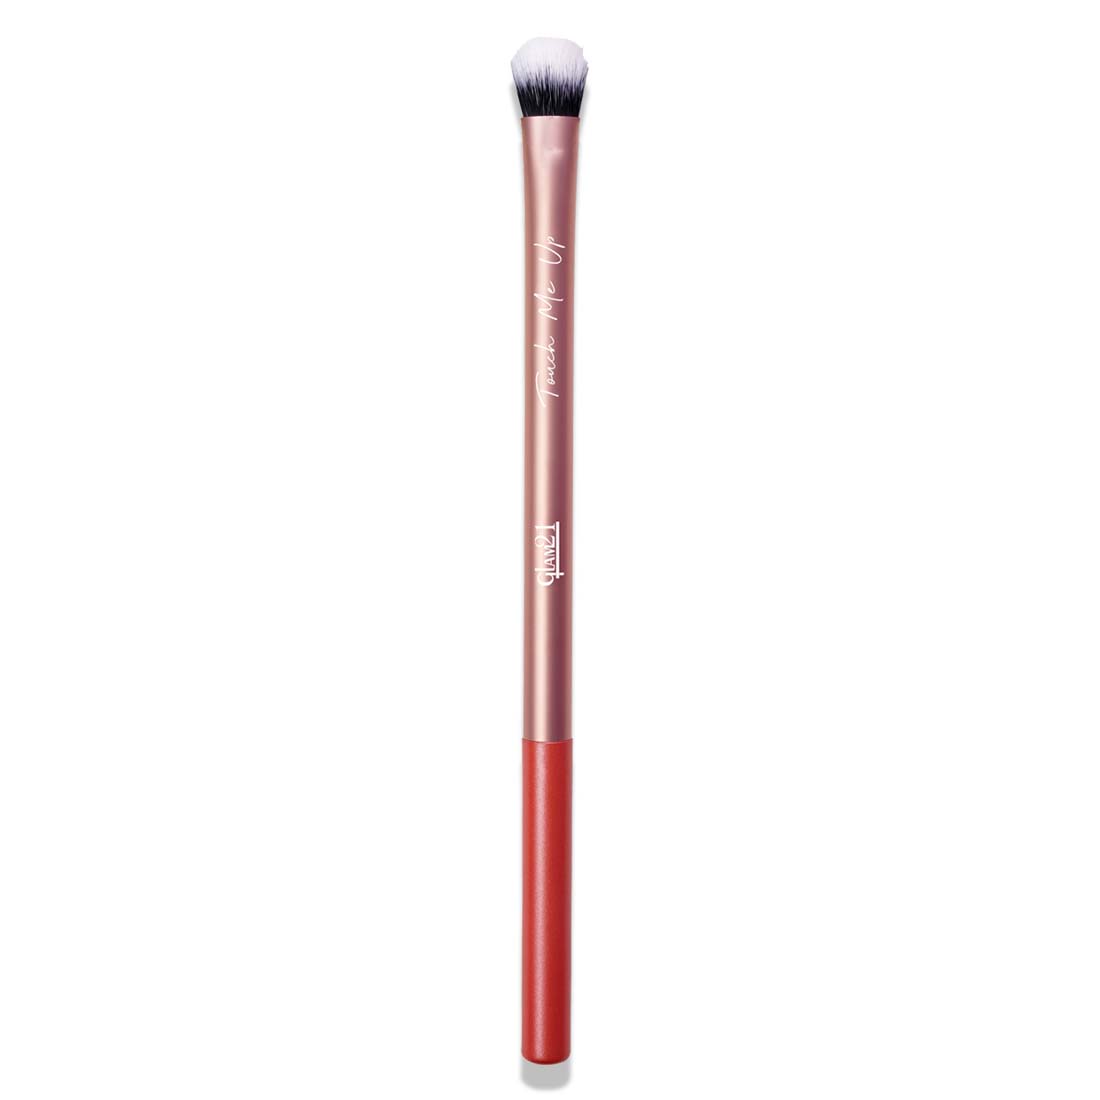 Glam21 Eye Shadow Brush Blending Brush with Soft Bristles to Coverage of Your Eyelids (Pack of 1)